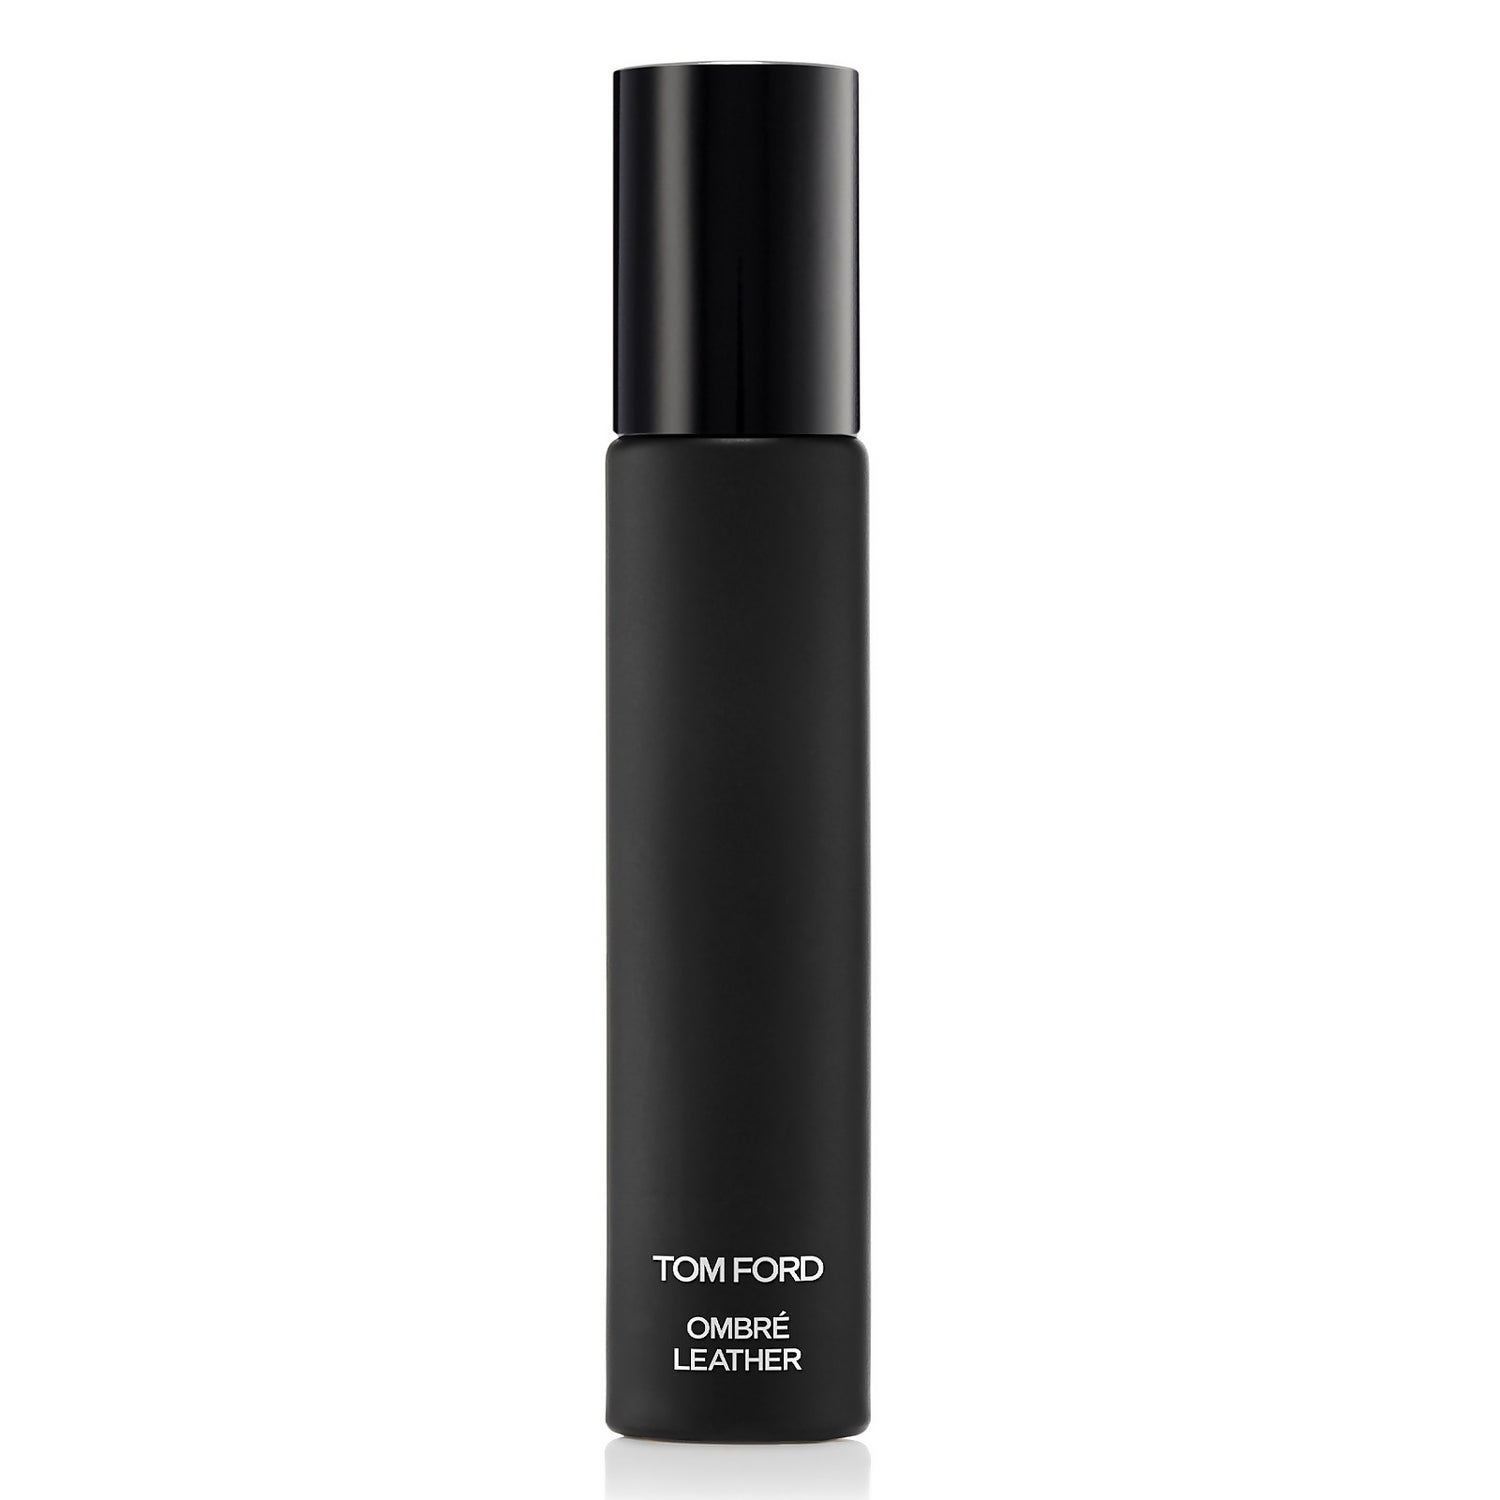 Tom Ford Ombre Leather Travel Spray 10ml - LOOKFANTASTIC